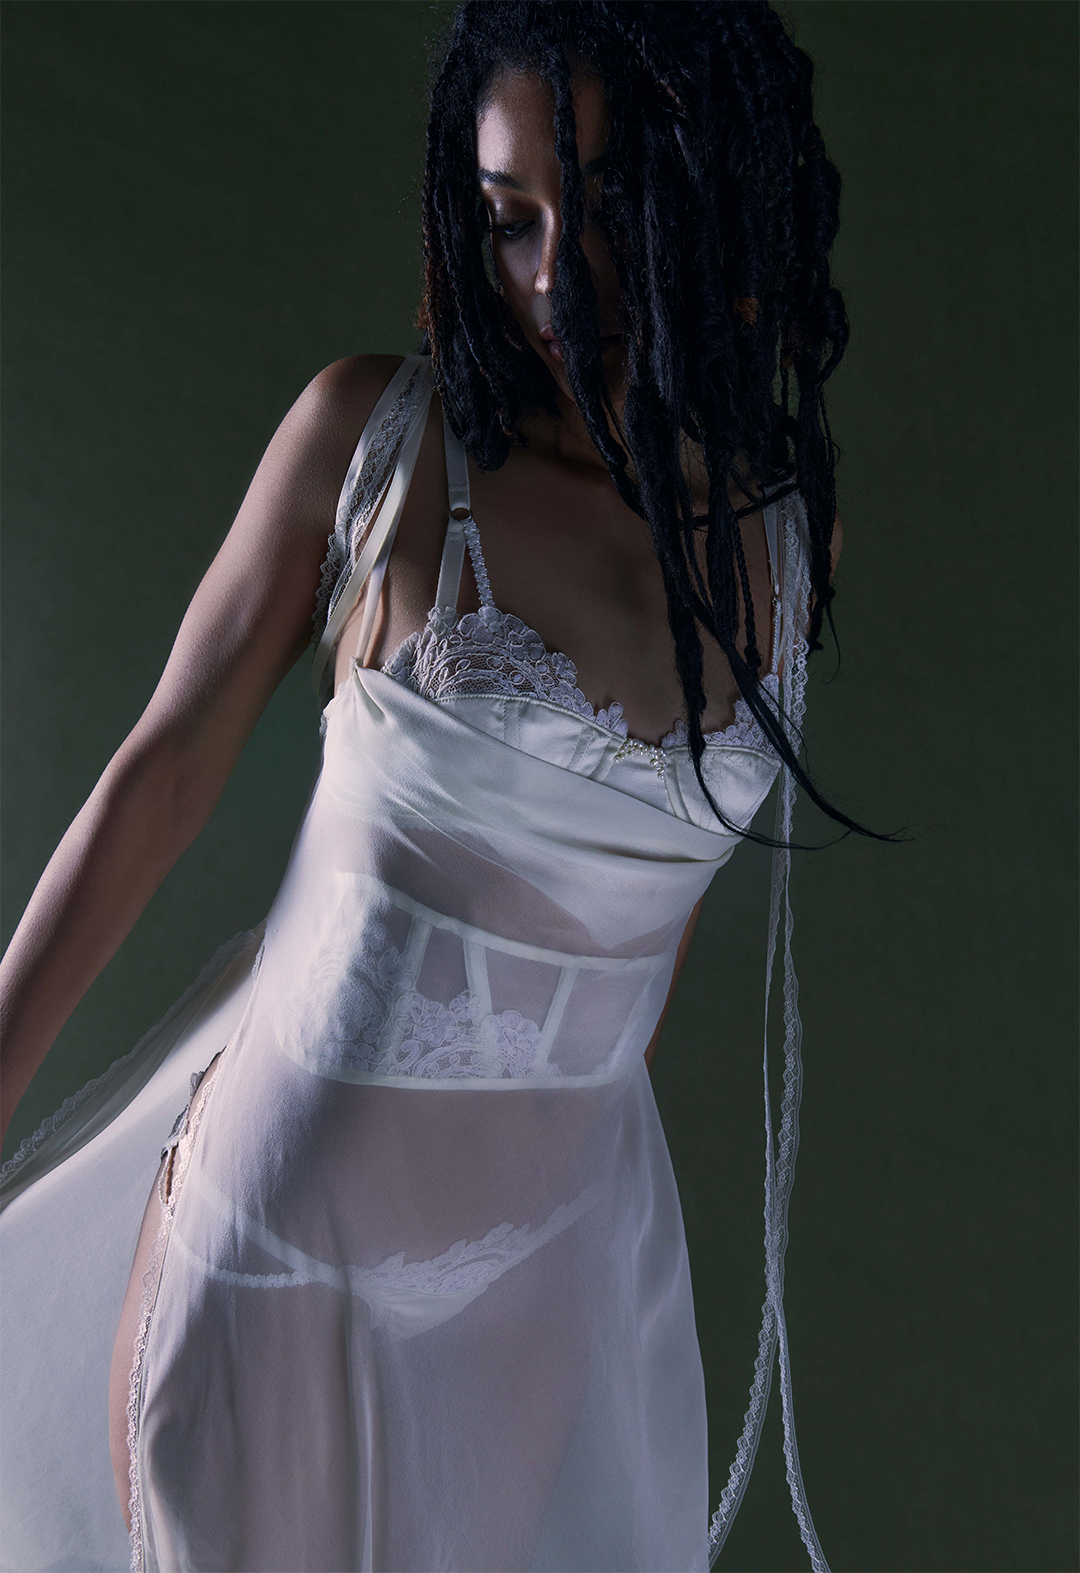 This image features an up-close view of a model in a long pearl-white bias gown with a cowl neck, open side seams and lace detailing. It is paired with a bra and panty set and matching waist corset embellished with lace and pearls. The image is set in a green background.